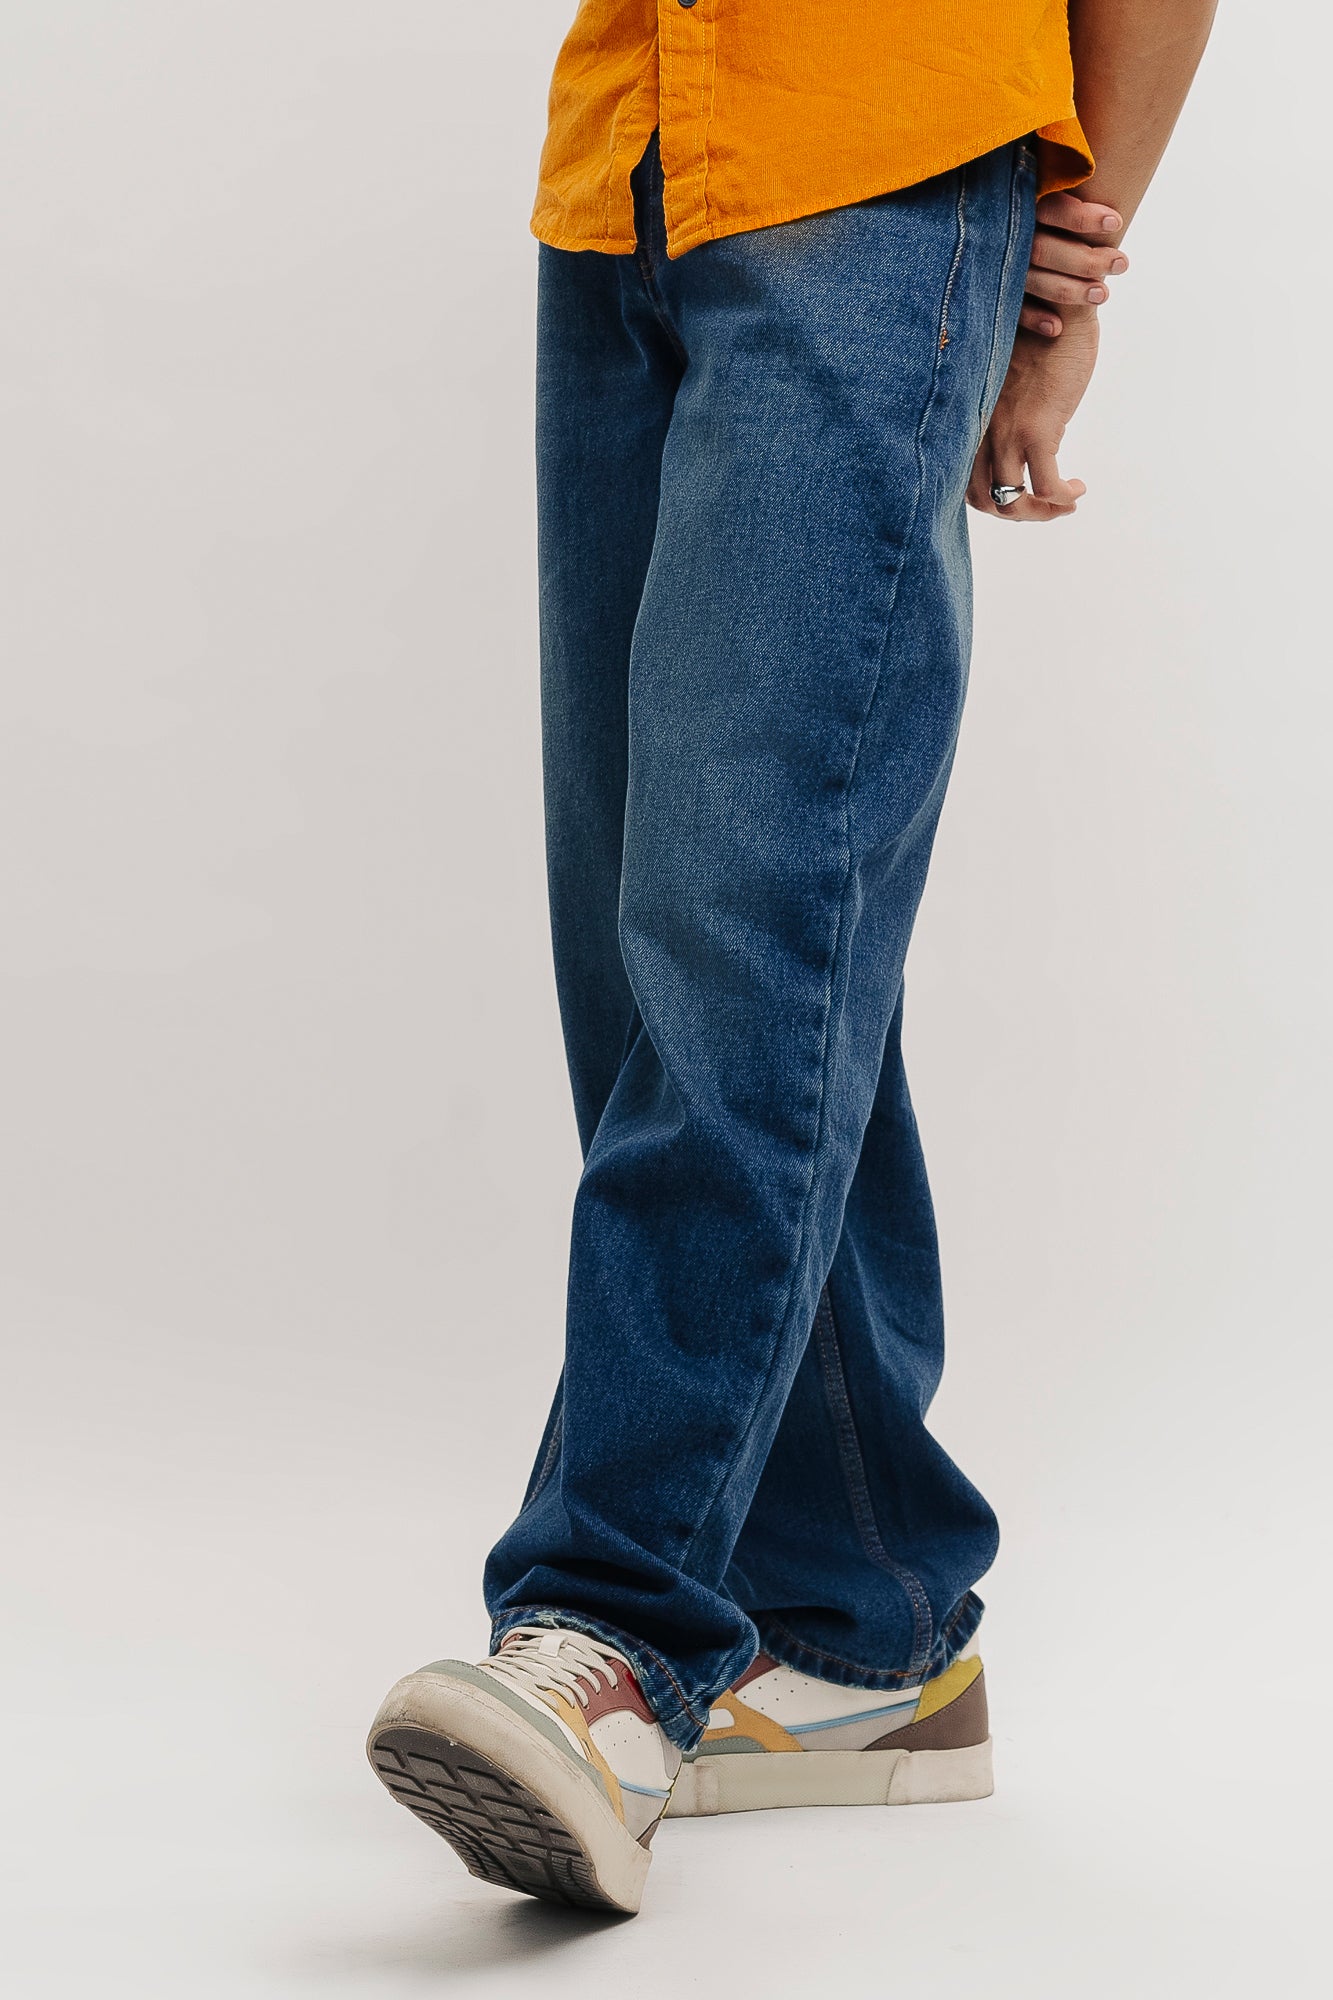 TINTED BAGGY MEN'S JEANS